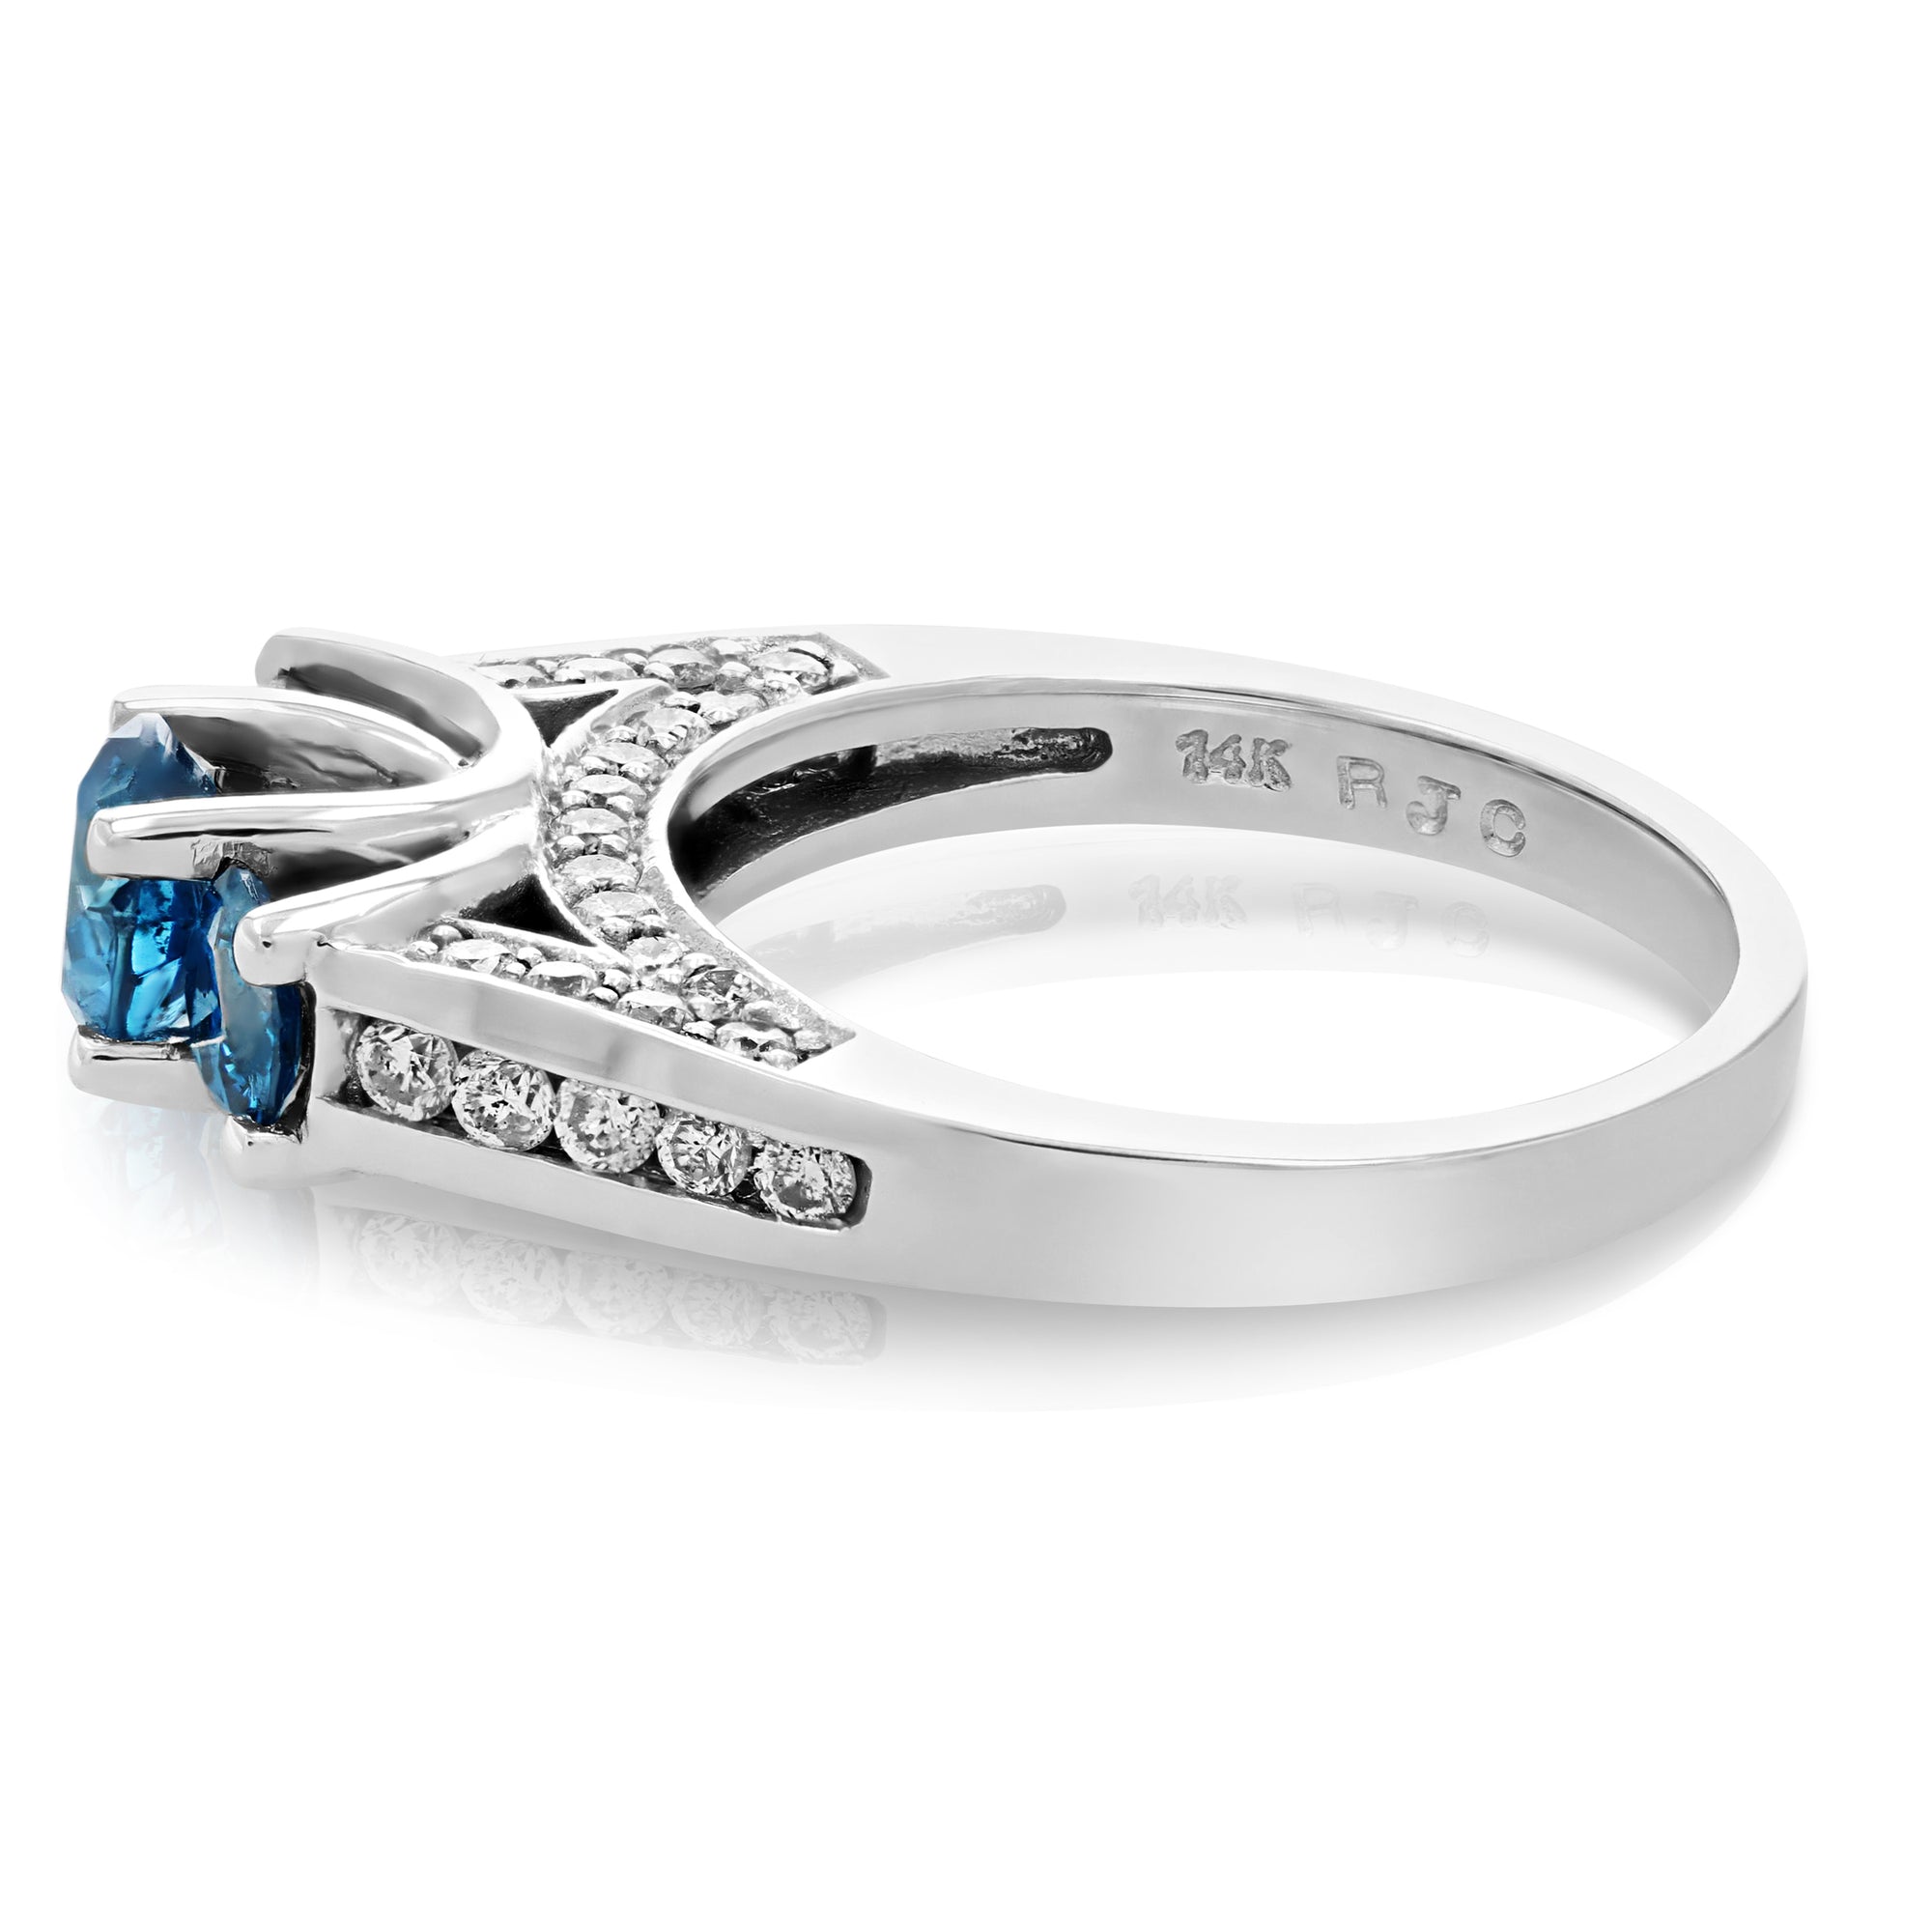 2.56 cttw Blue and White Diamond 3 Stone Ring 14K White Gold Engagement Size 7